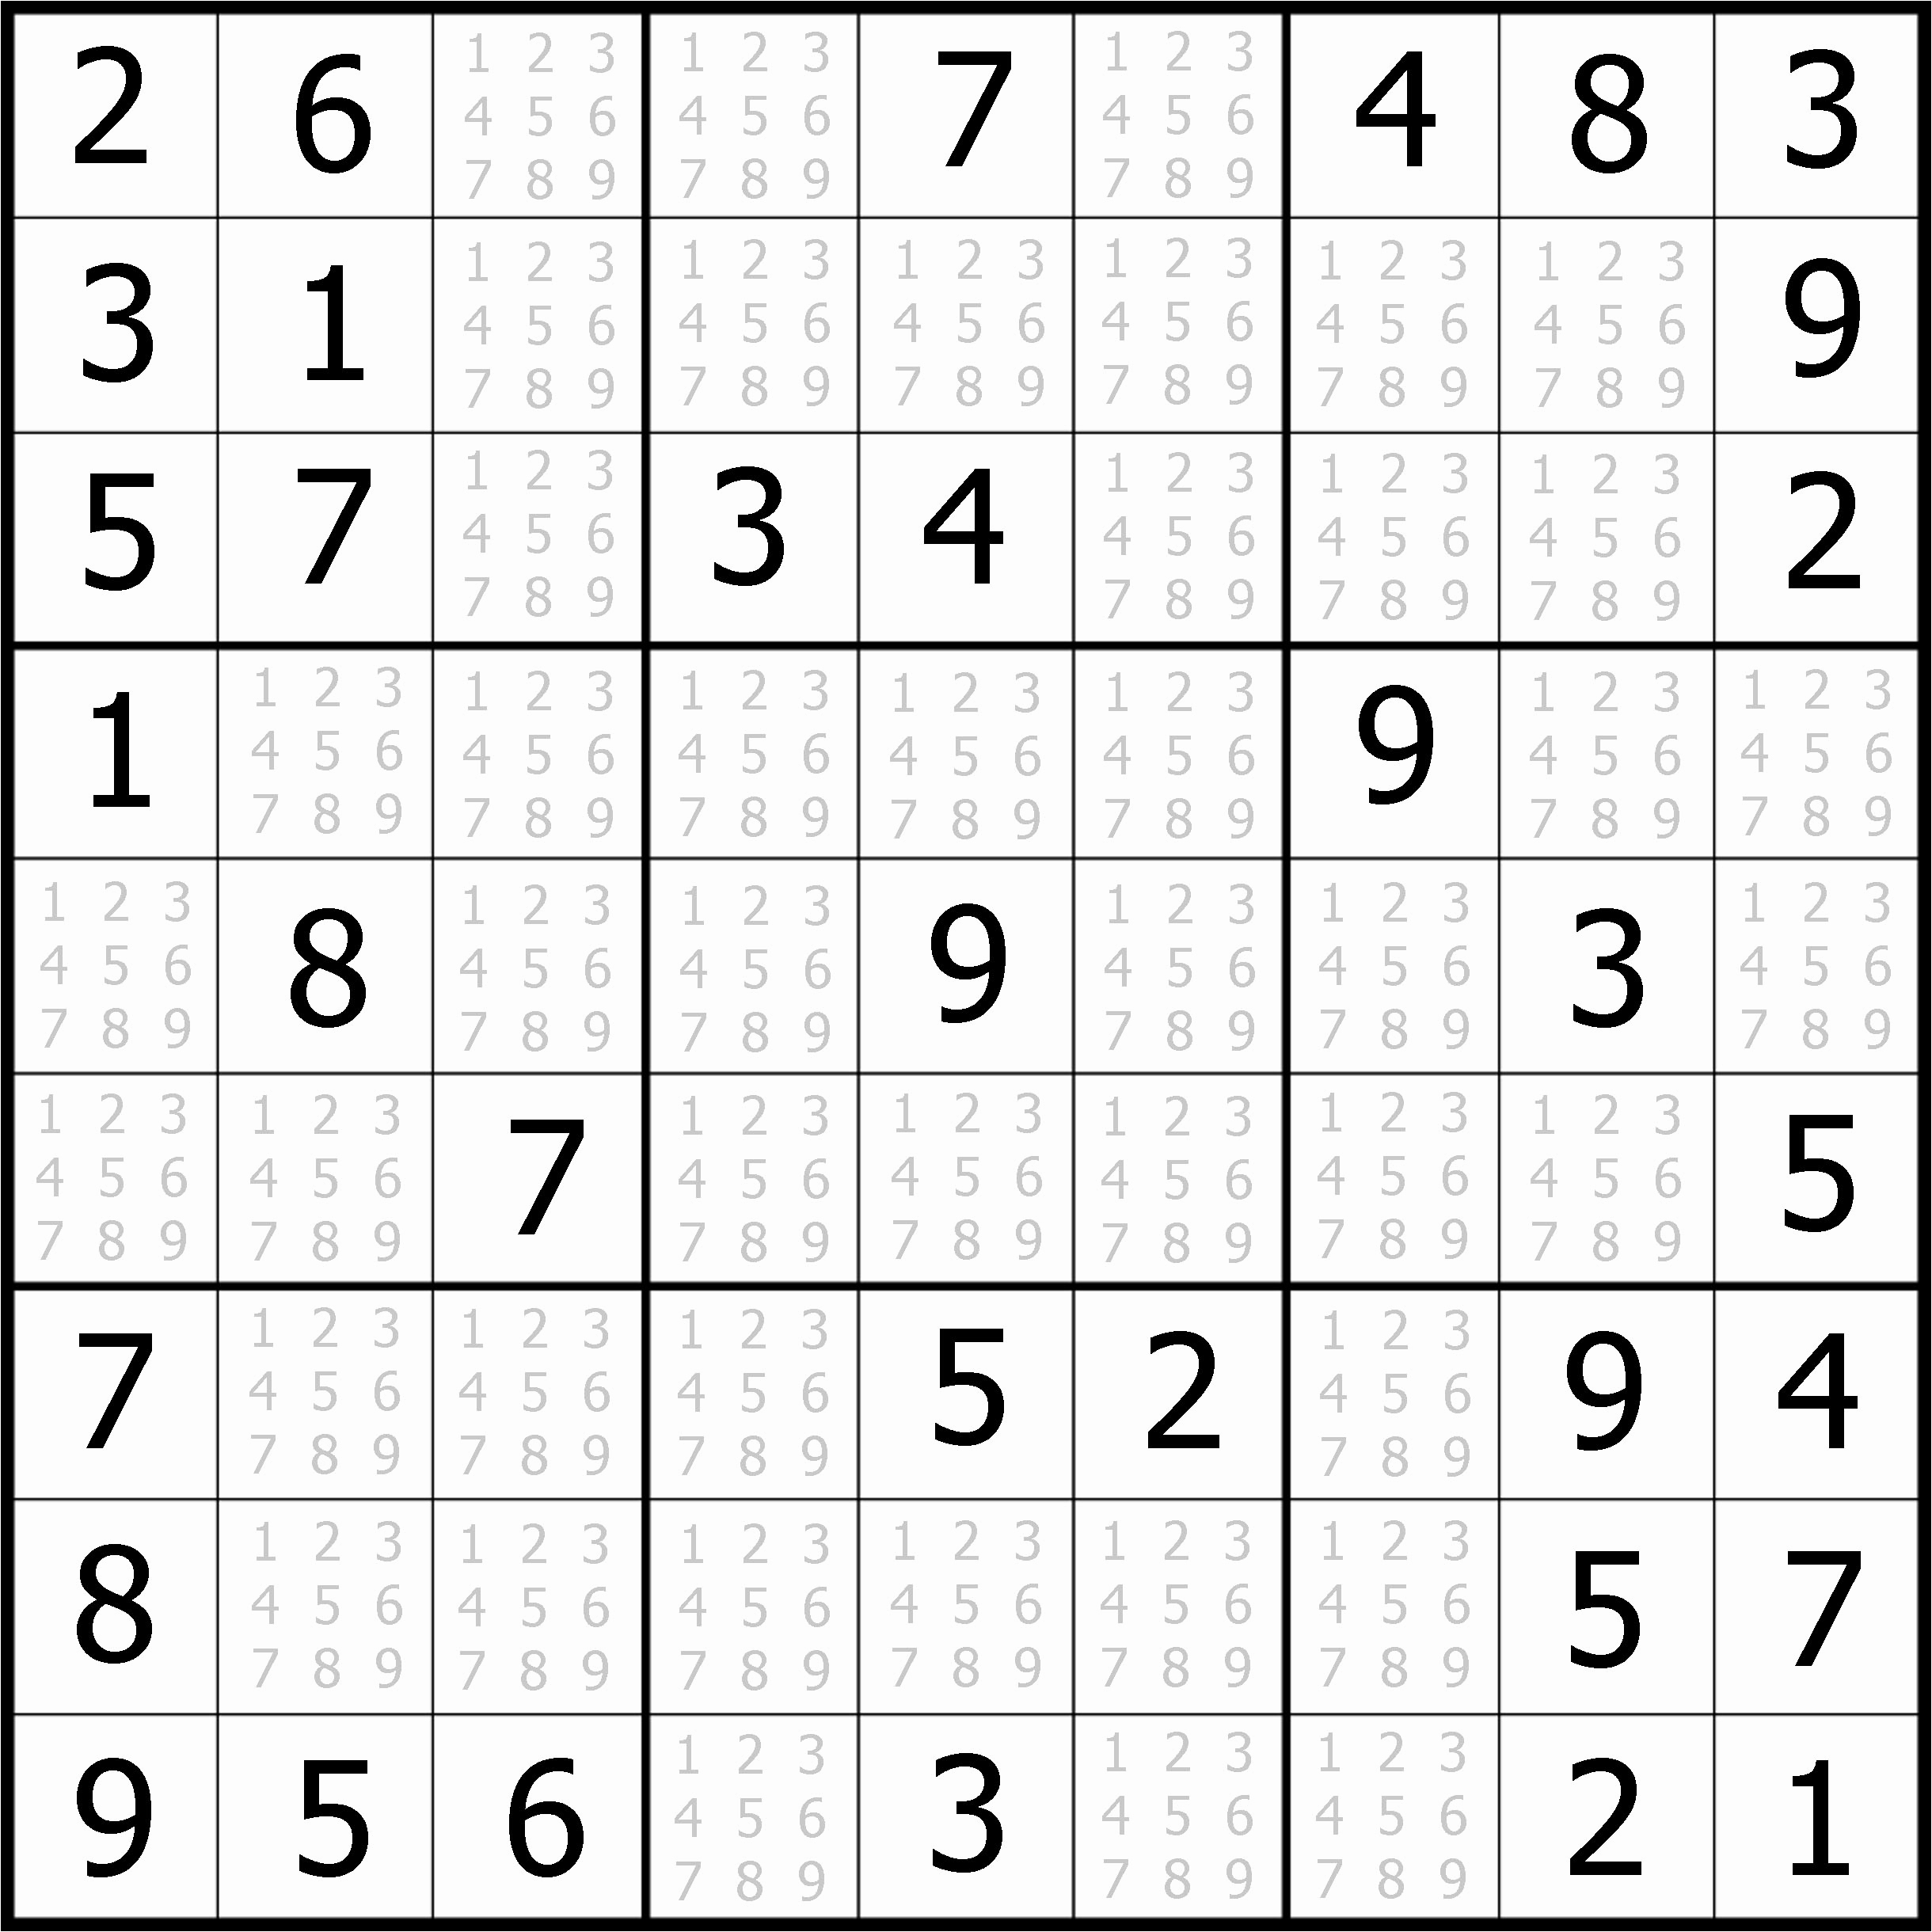 Easy Sudoku Puzzles To Print Free Example Easy Sudoku For You - Printable Sudoku Puzzles For Beginners